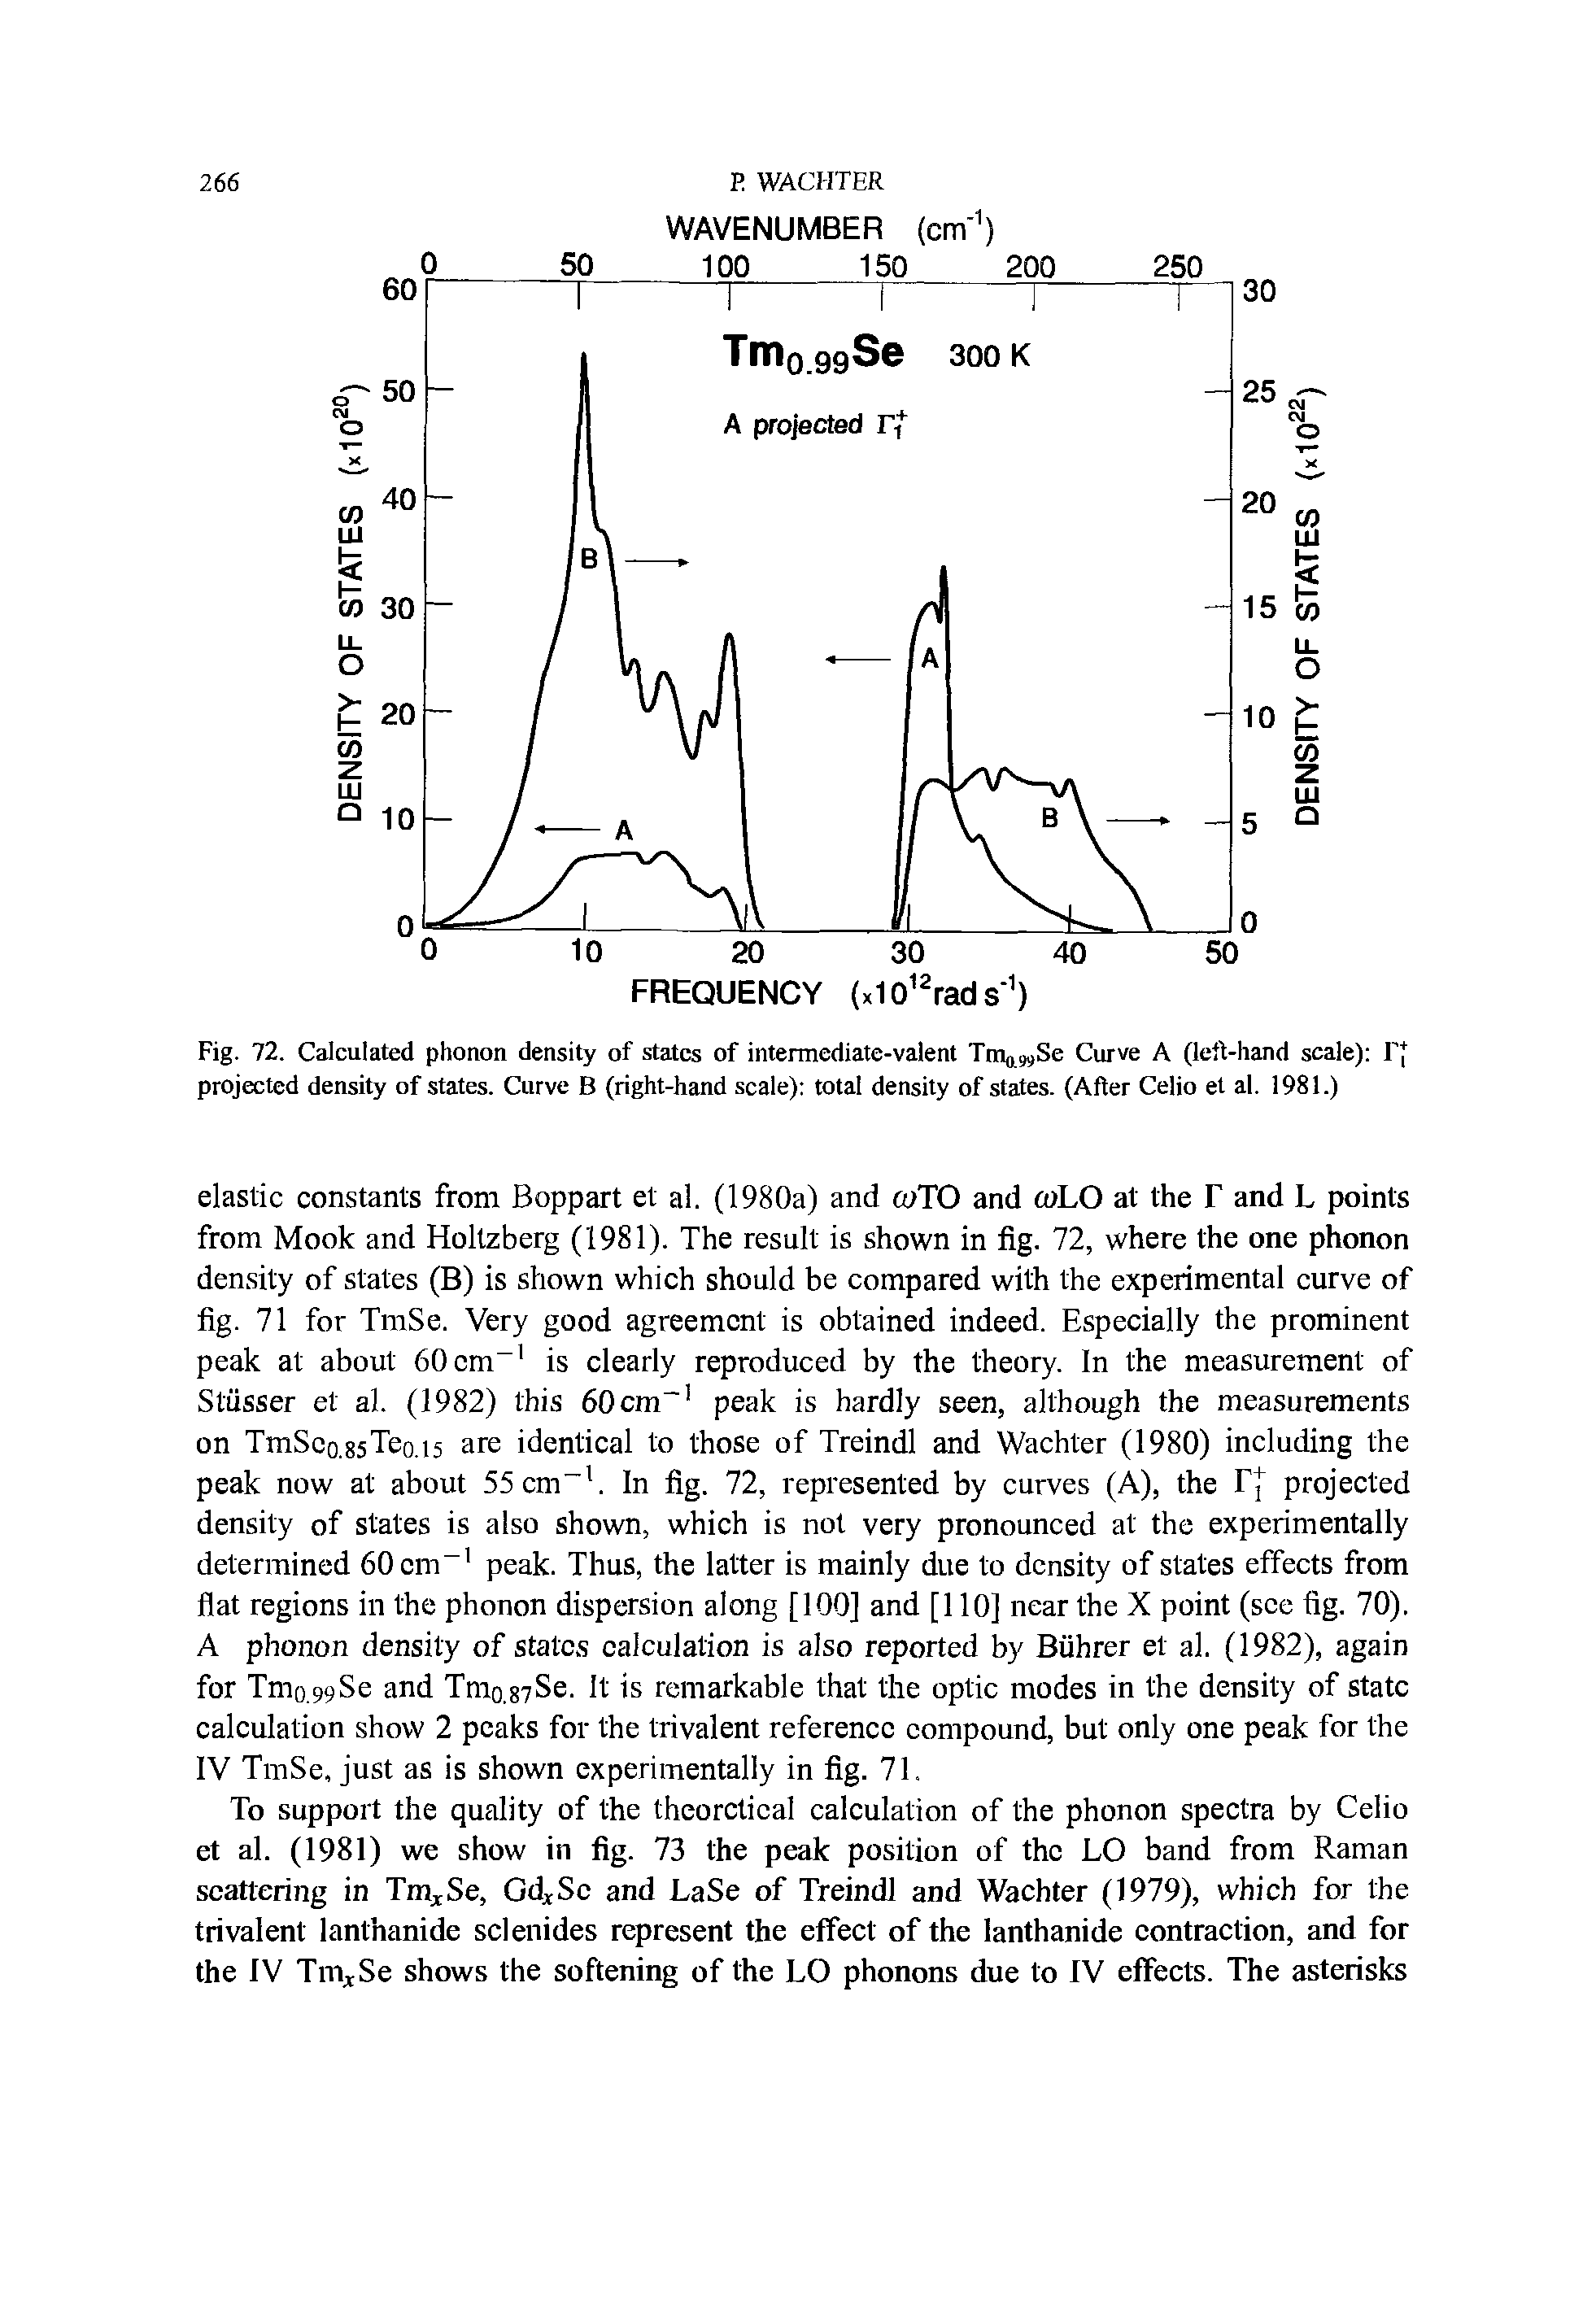 Fig. 72. Calculated phonon density of states of intermediate-valent Tm wSe Curve A (left-hand scale) F projected density of states. Curve B (right-hand scale) total density of states. (After Celio et al. 1981.)...